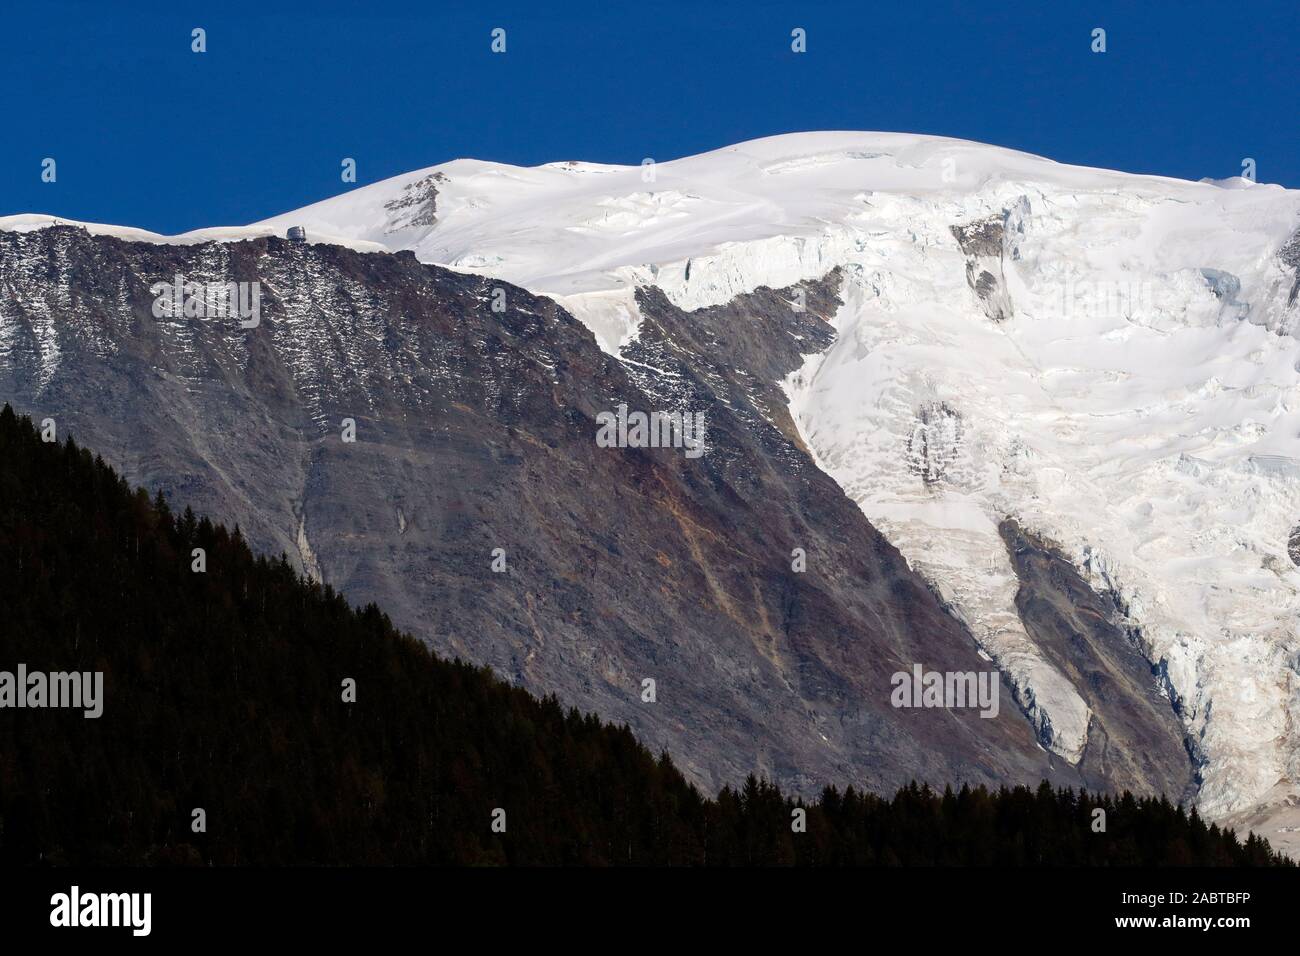 Landscape of the French Alps in summer.  Mont Blanc Massif.  Gouter refuge and Bionnassay glacier. Saint-Gervais. France. Stock Photo